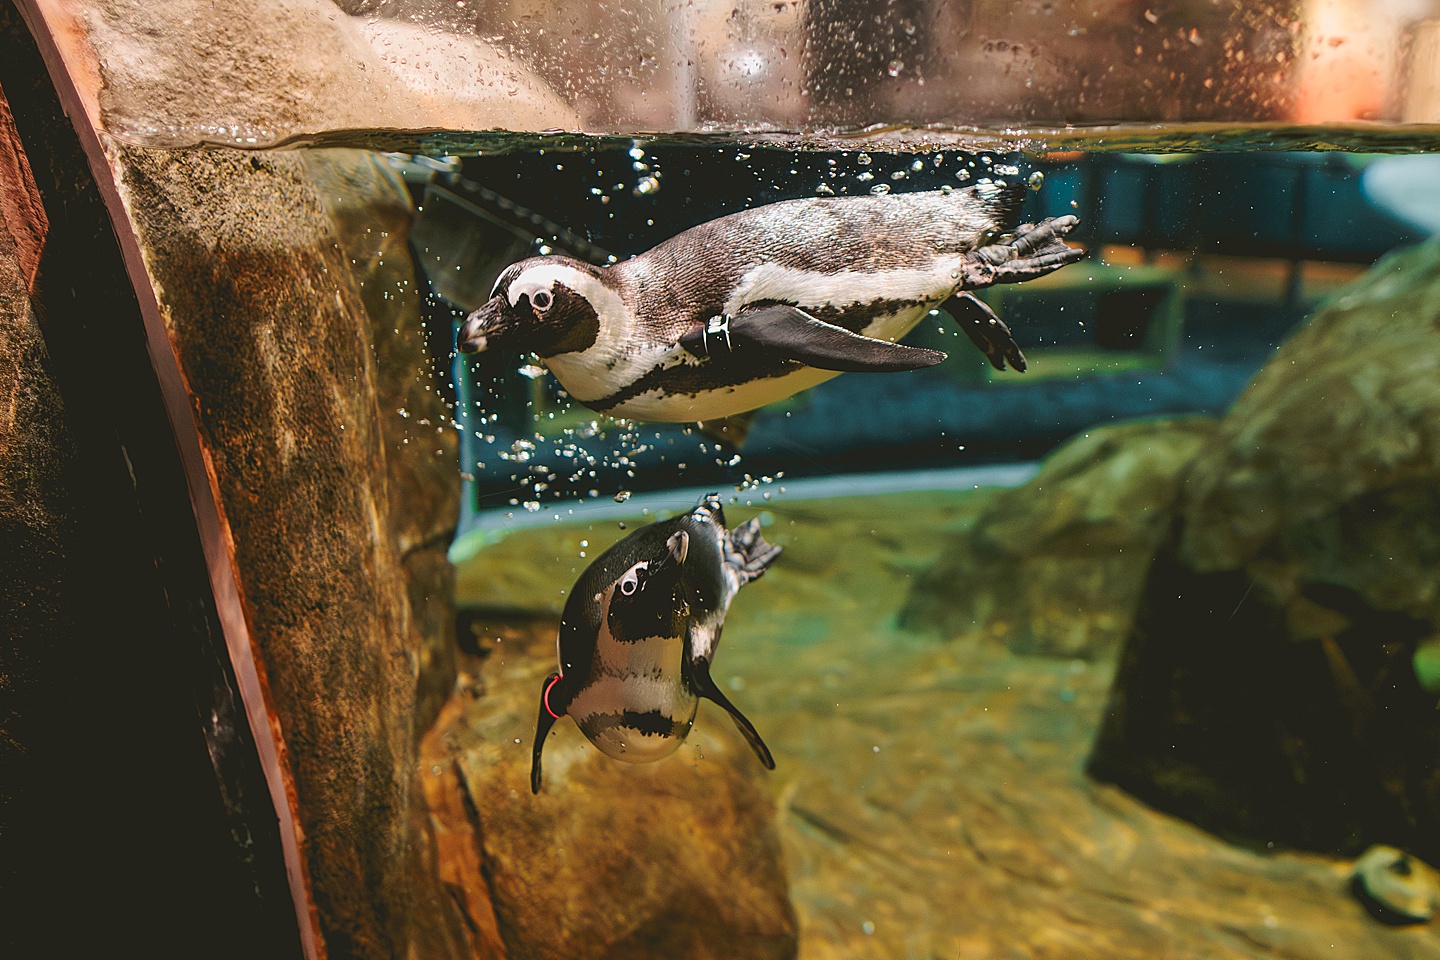 Penguins at the Greensboro Science Center